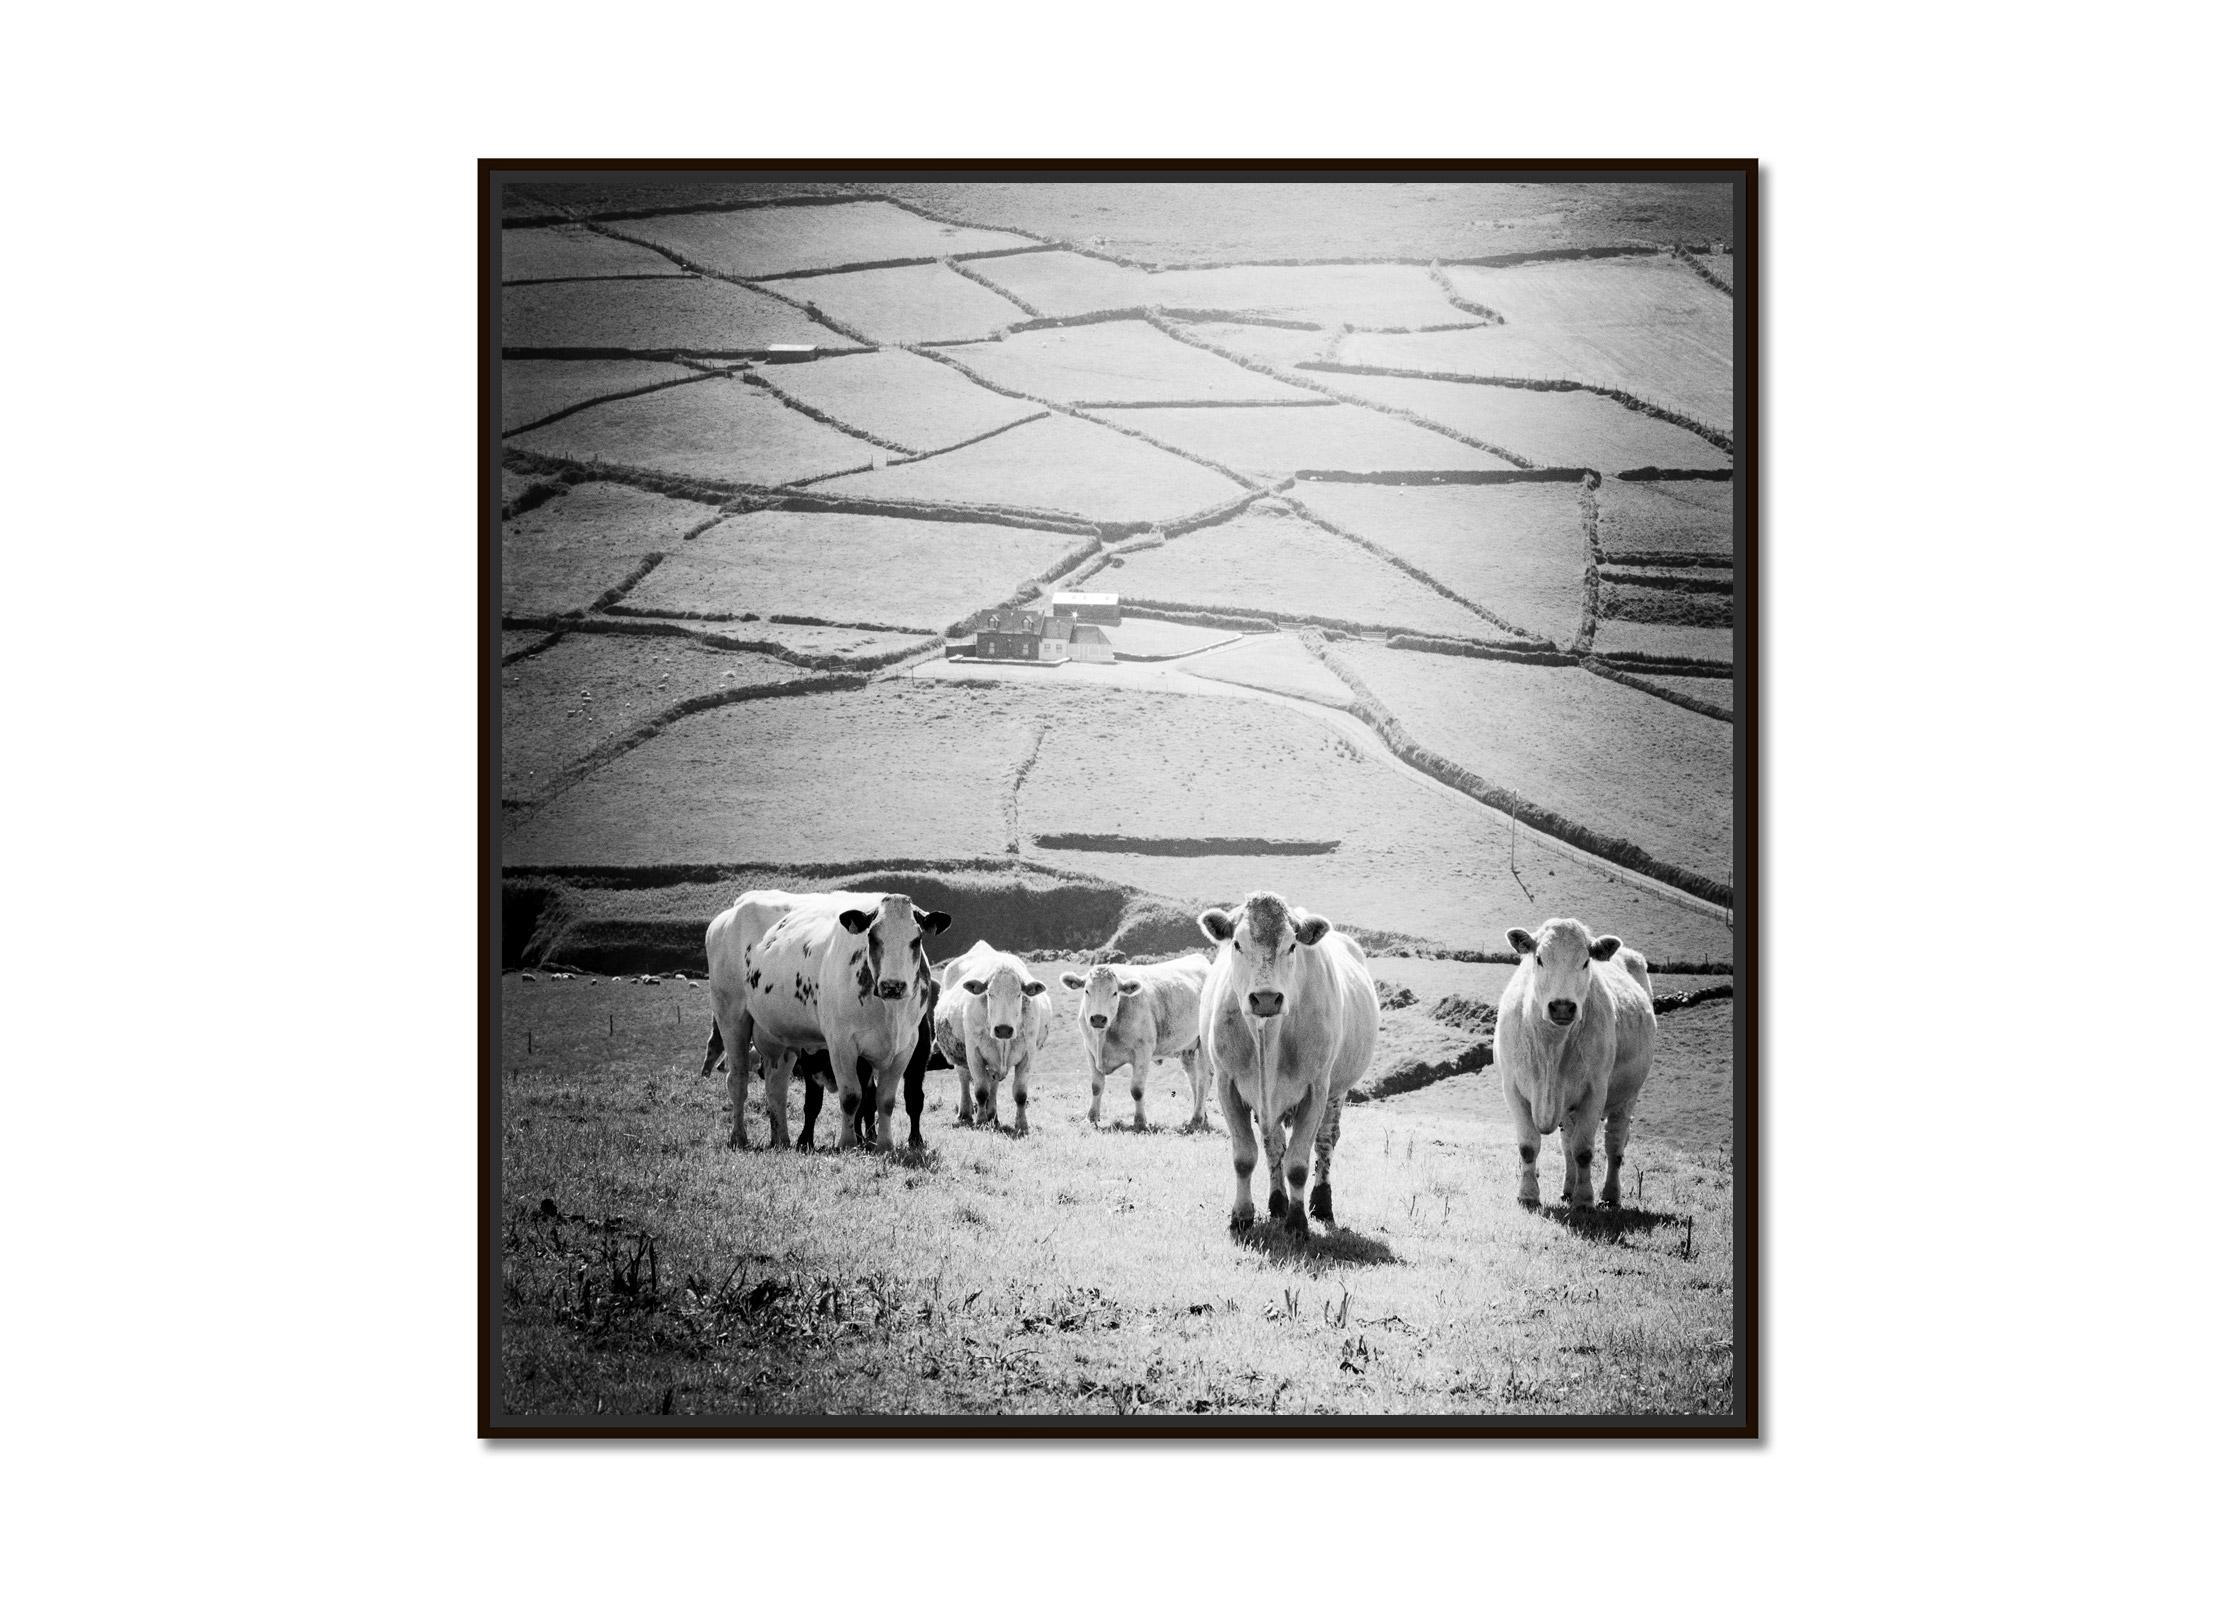 What´s up, Cows on Field, Ireland, black and white photography, art landscape - Photograph by Gerald Berghammer